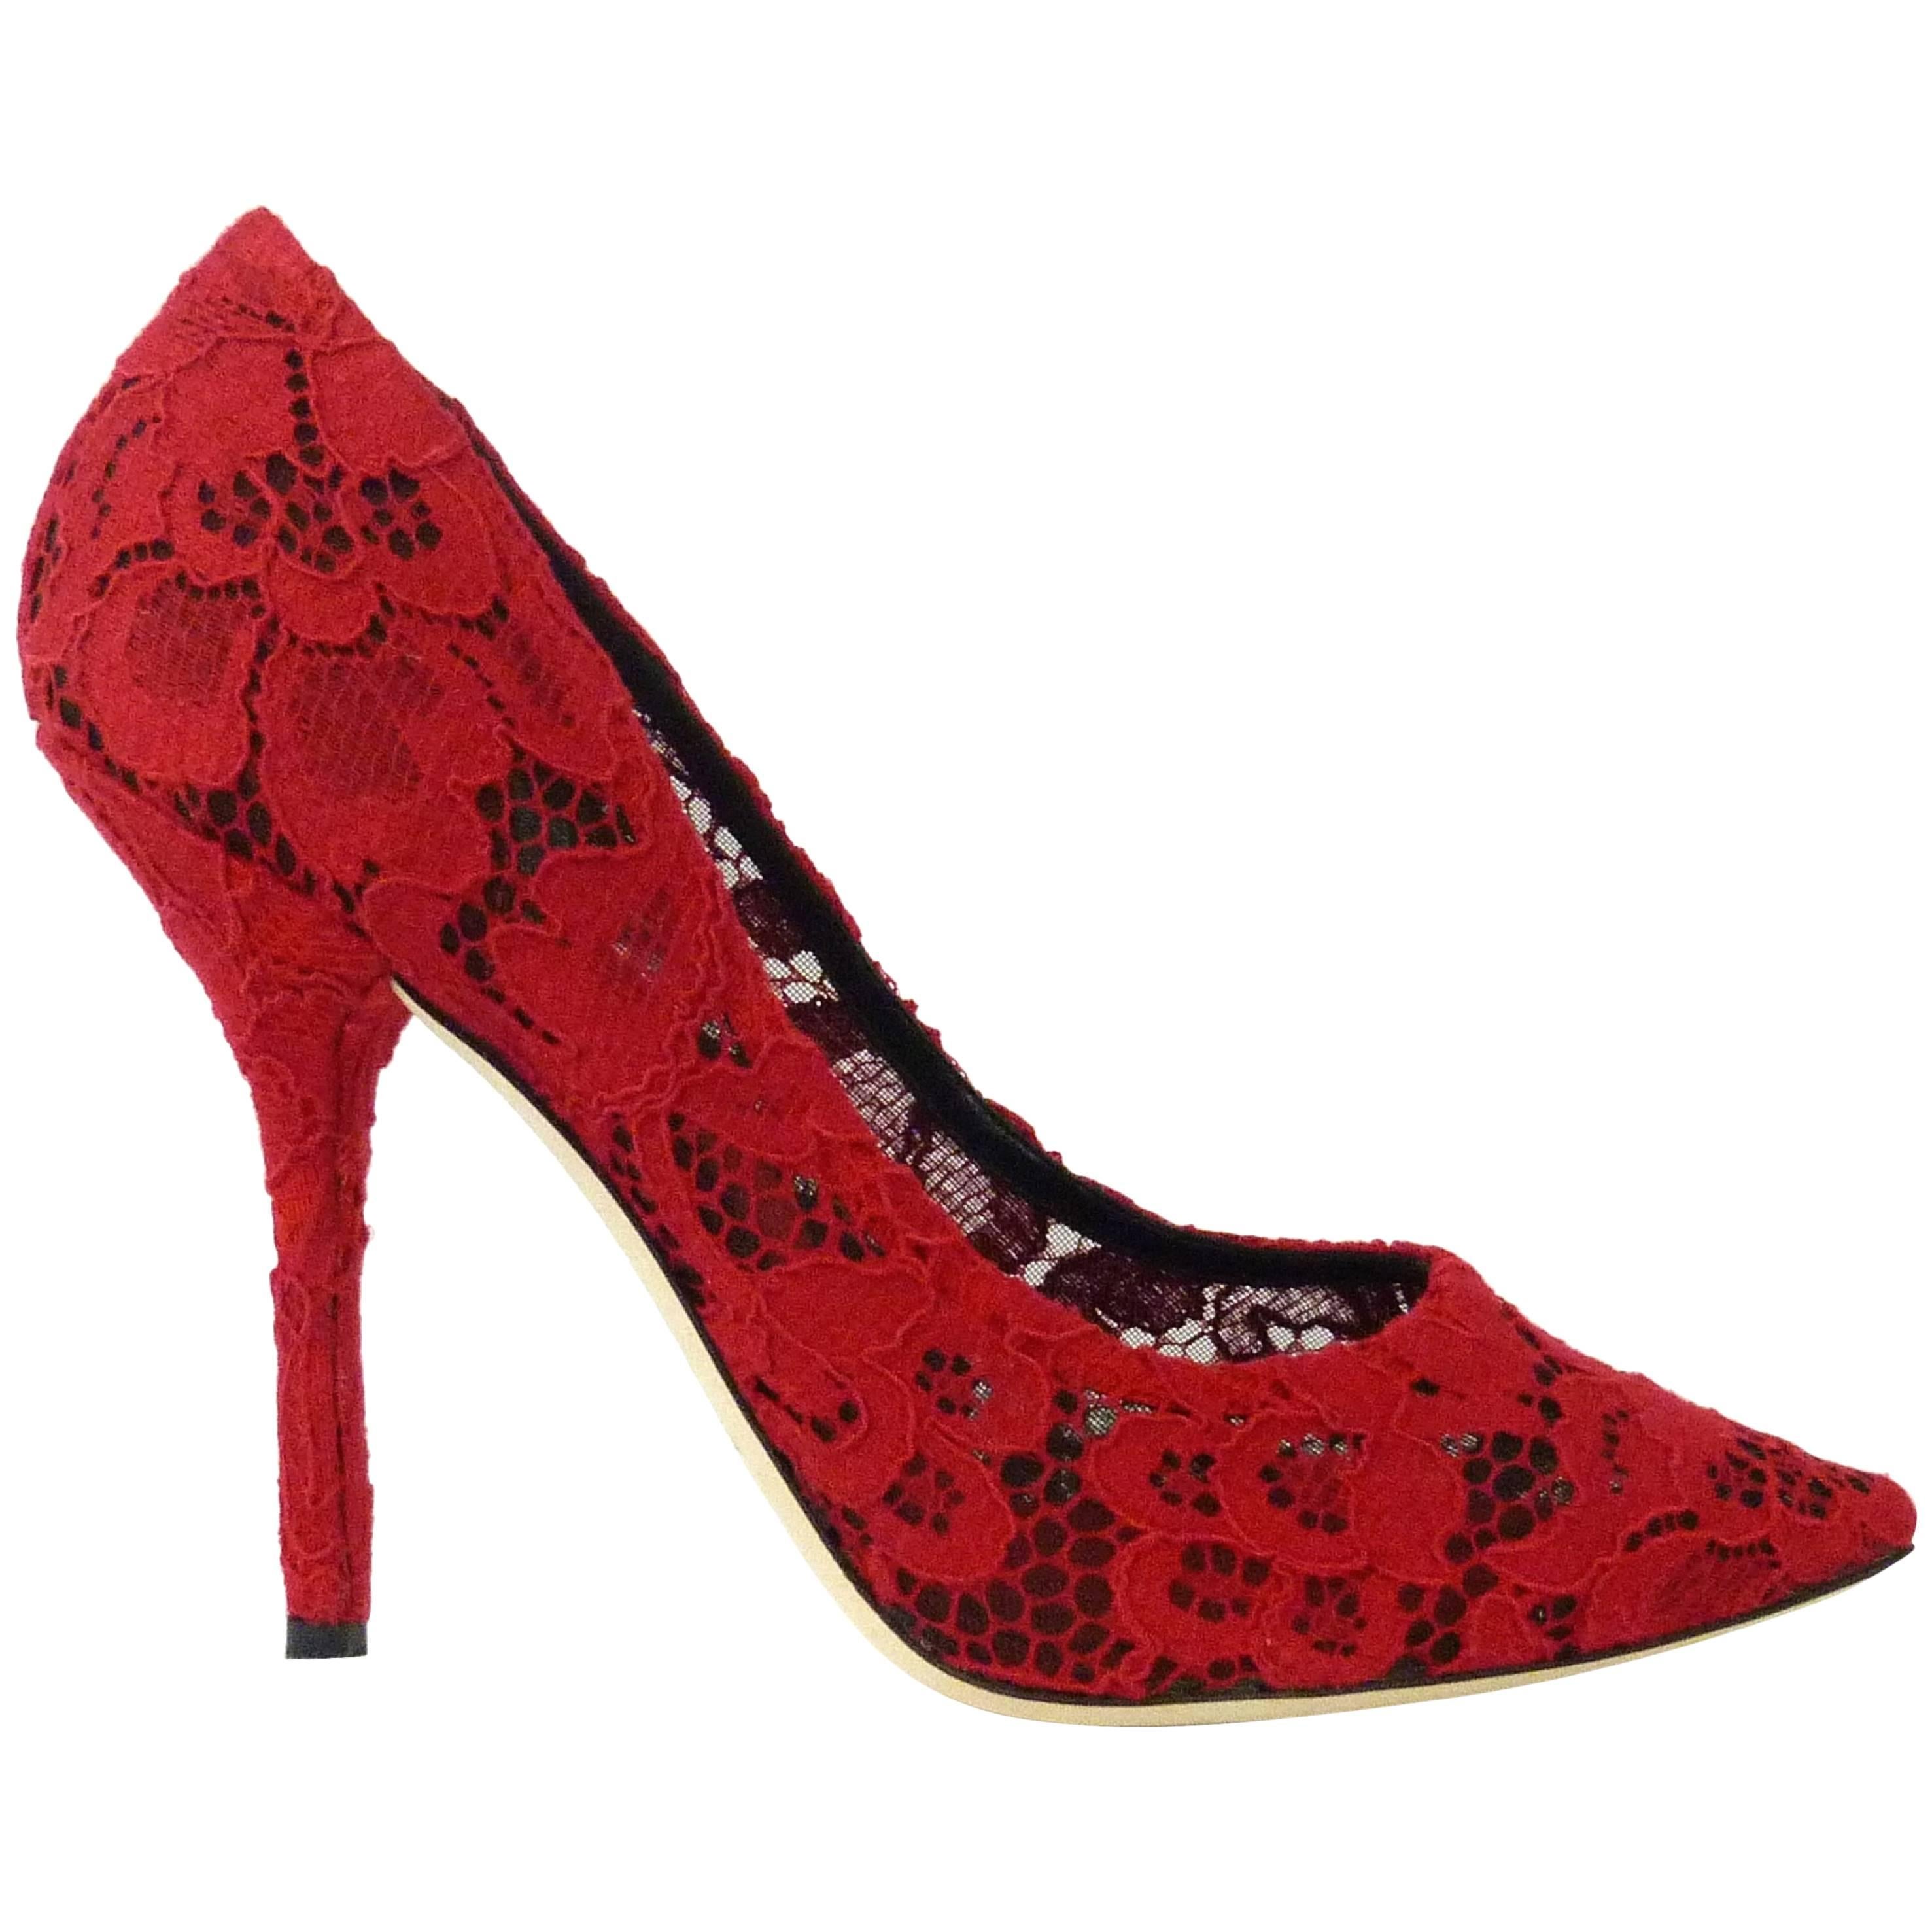 Dolce & Gabbana Bellucci lace red heels For Sale